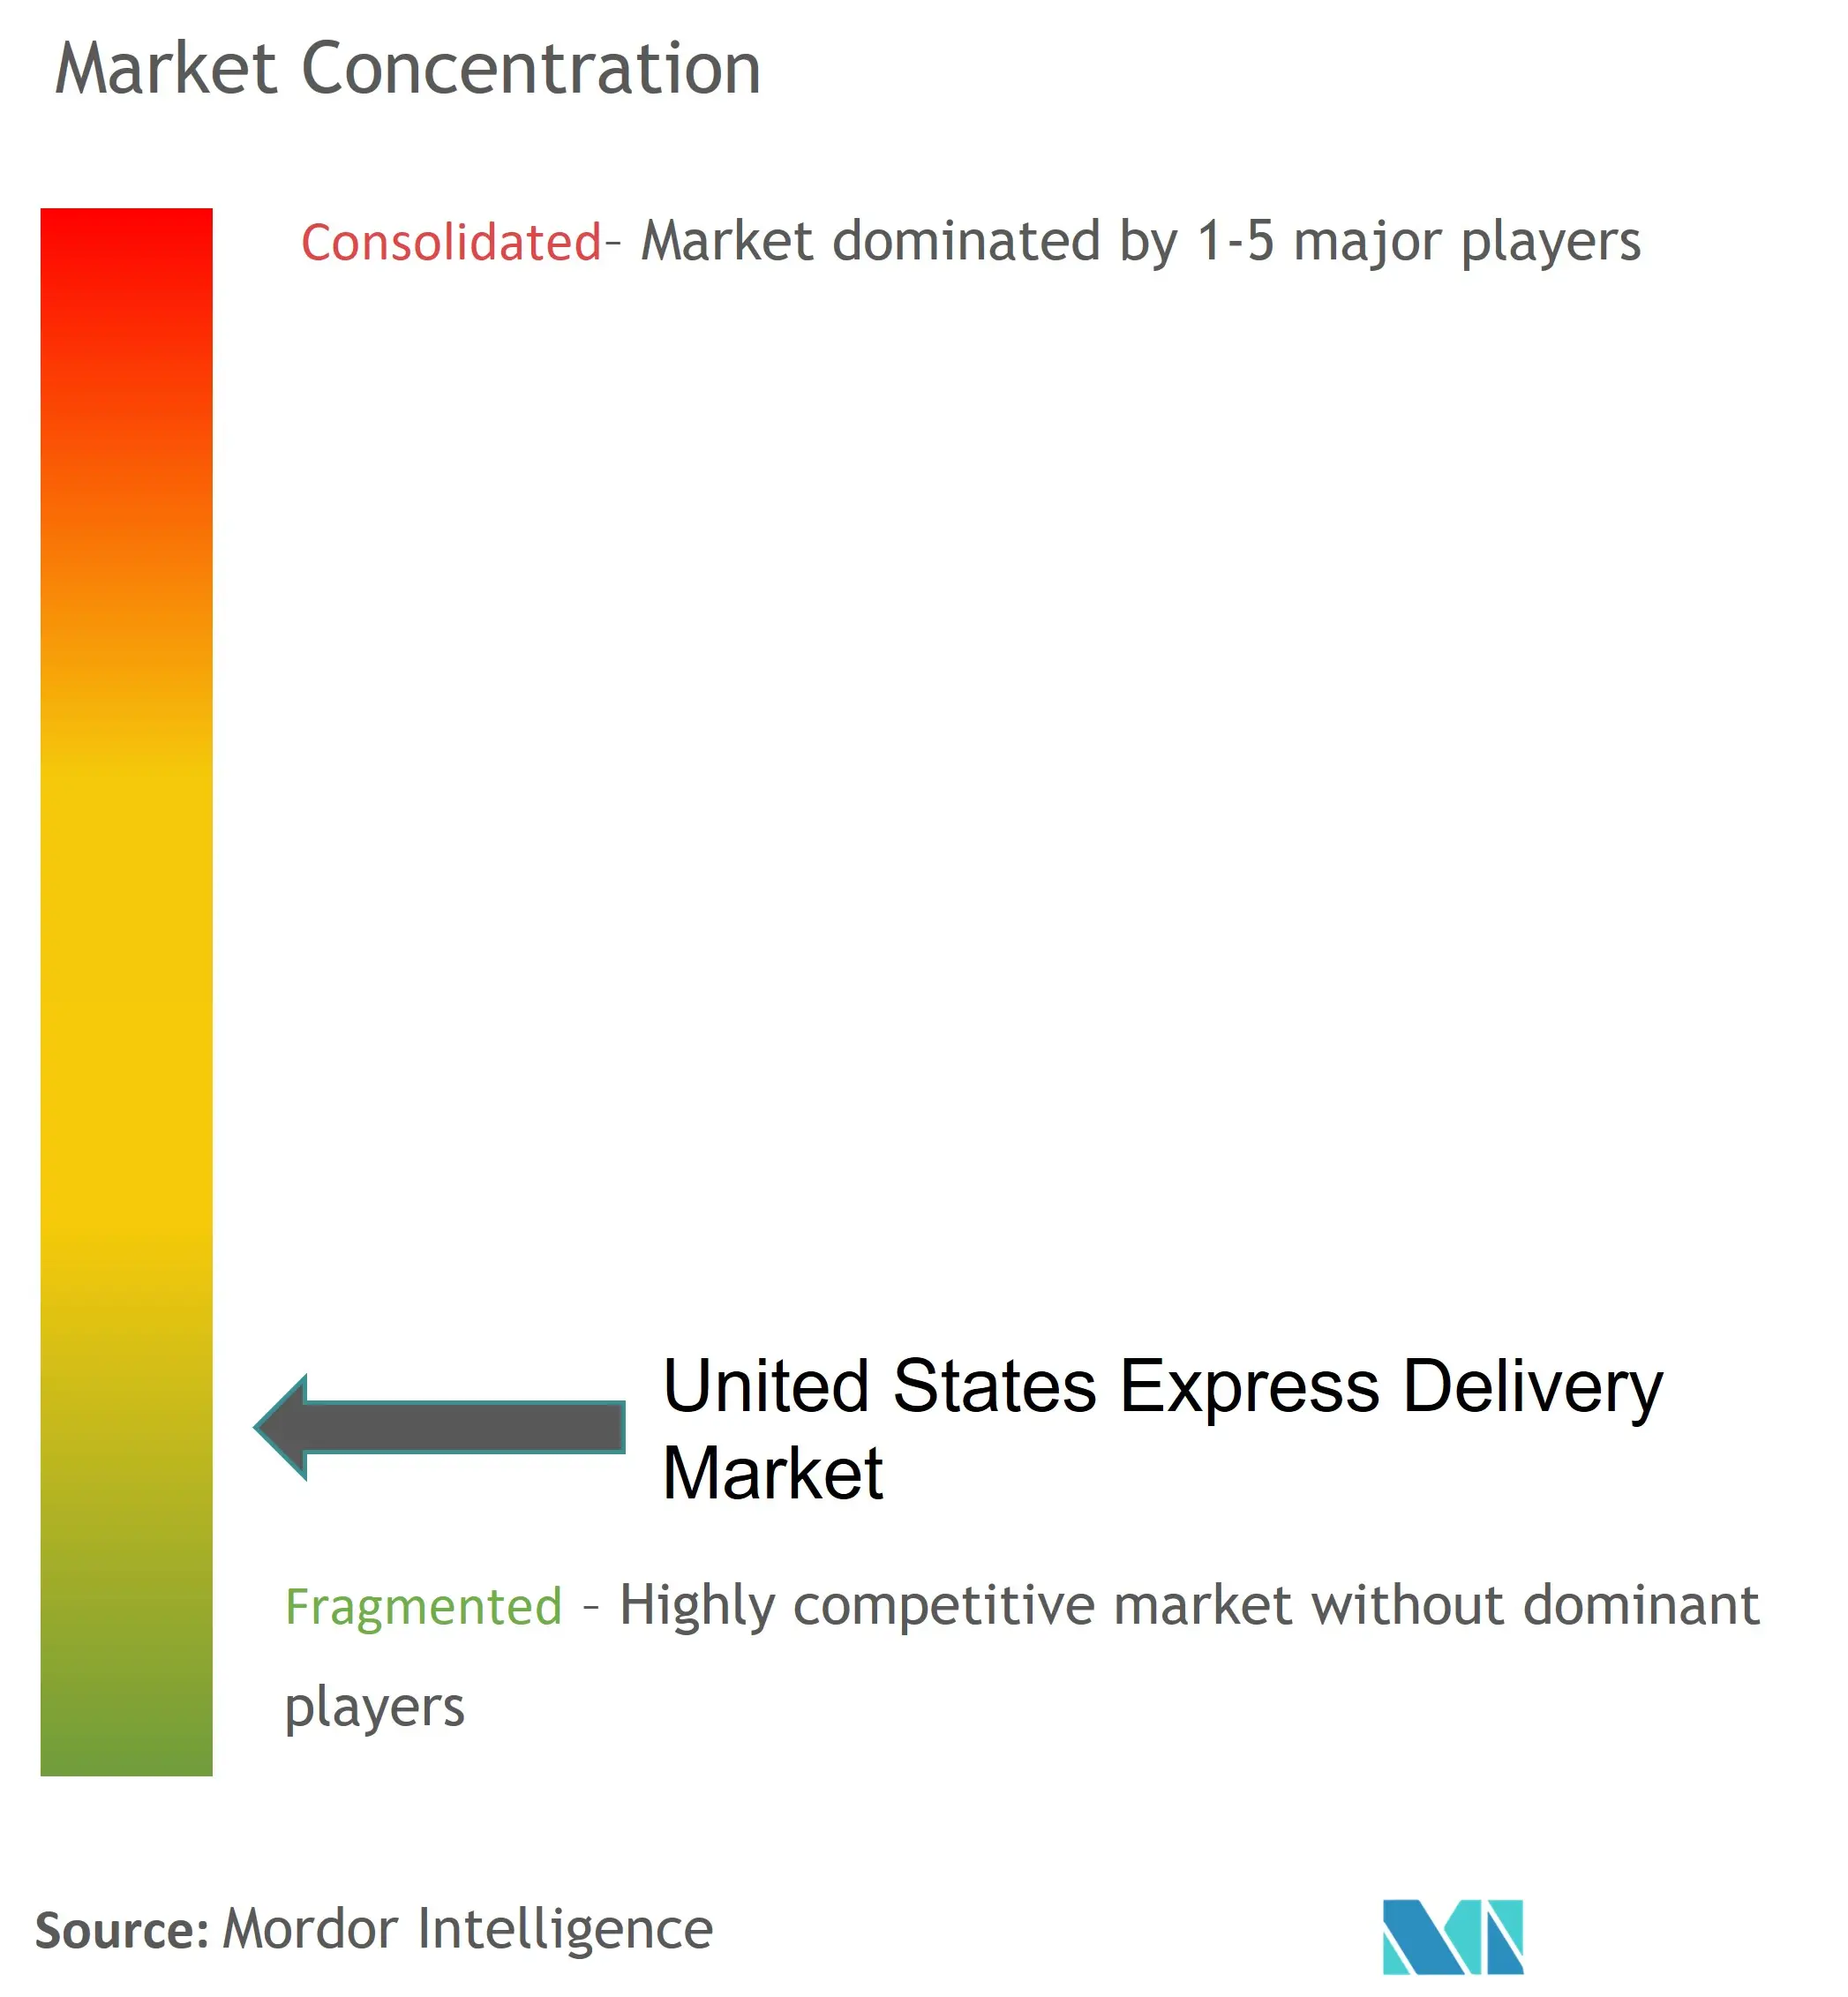 US Express Delivery Market Concentration